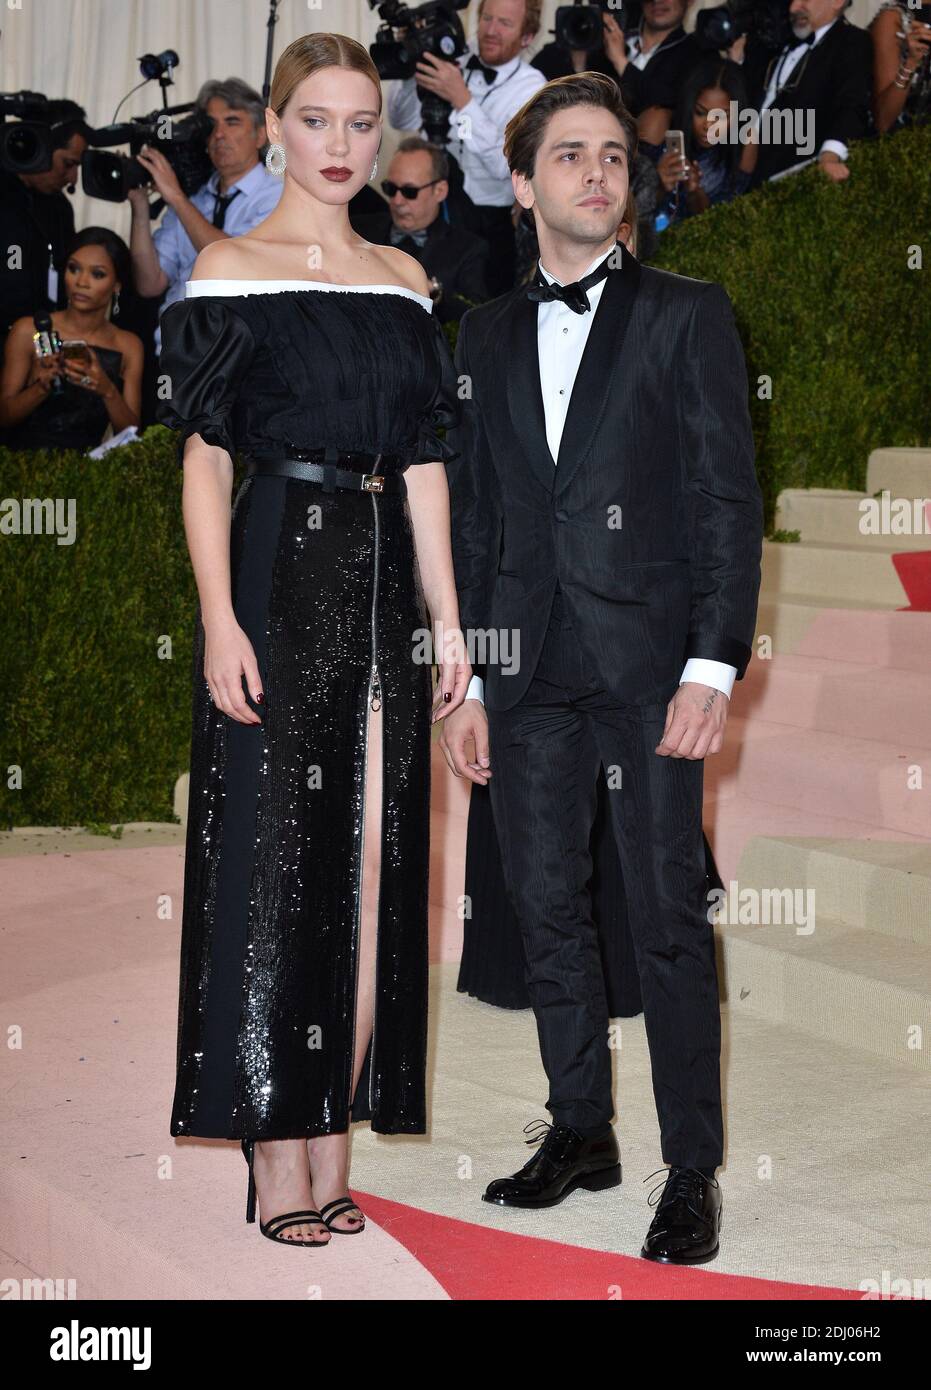 Lea Seydoux and Xavier Dolan attending the 'Manus x Machina: Fashion In An  Age Of Technology' Costume Institute Gala at Metropolitan Museum of Art on  May 2, 2016 in New York City.